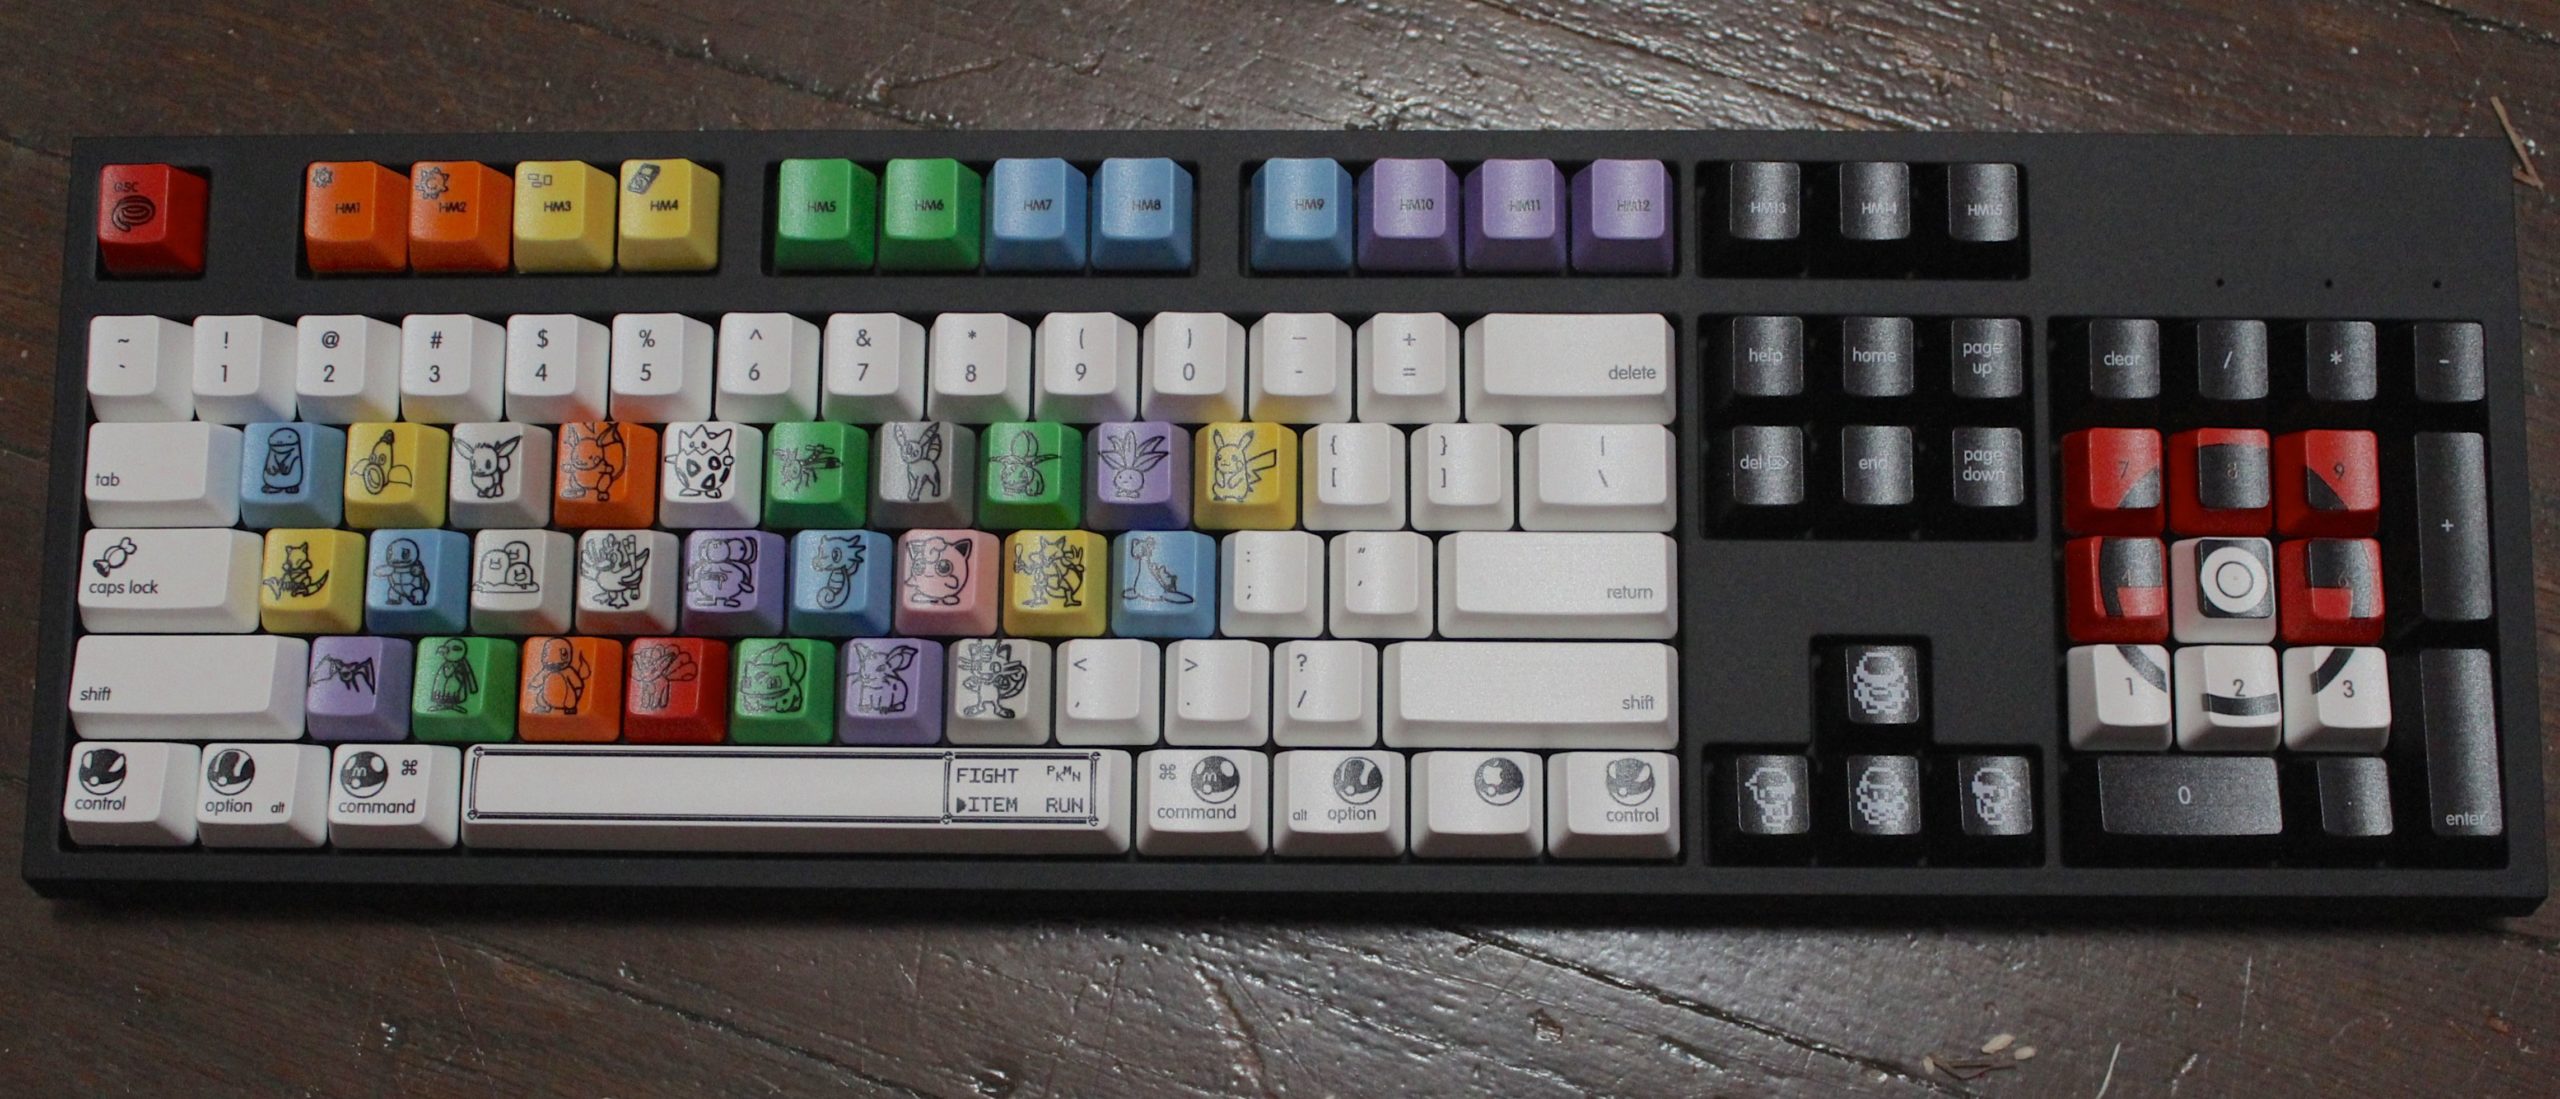 My Final Fantasy Keyboard Has Quina Instead Of A Q